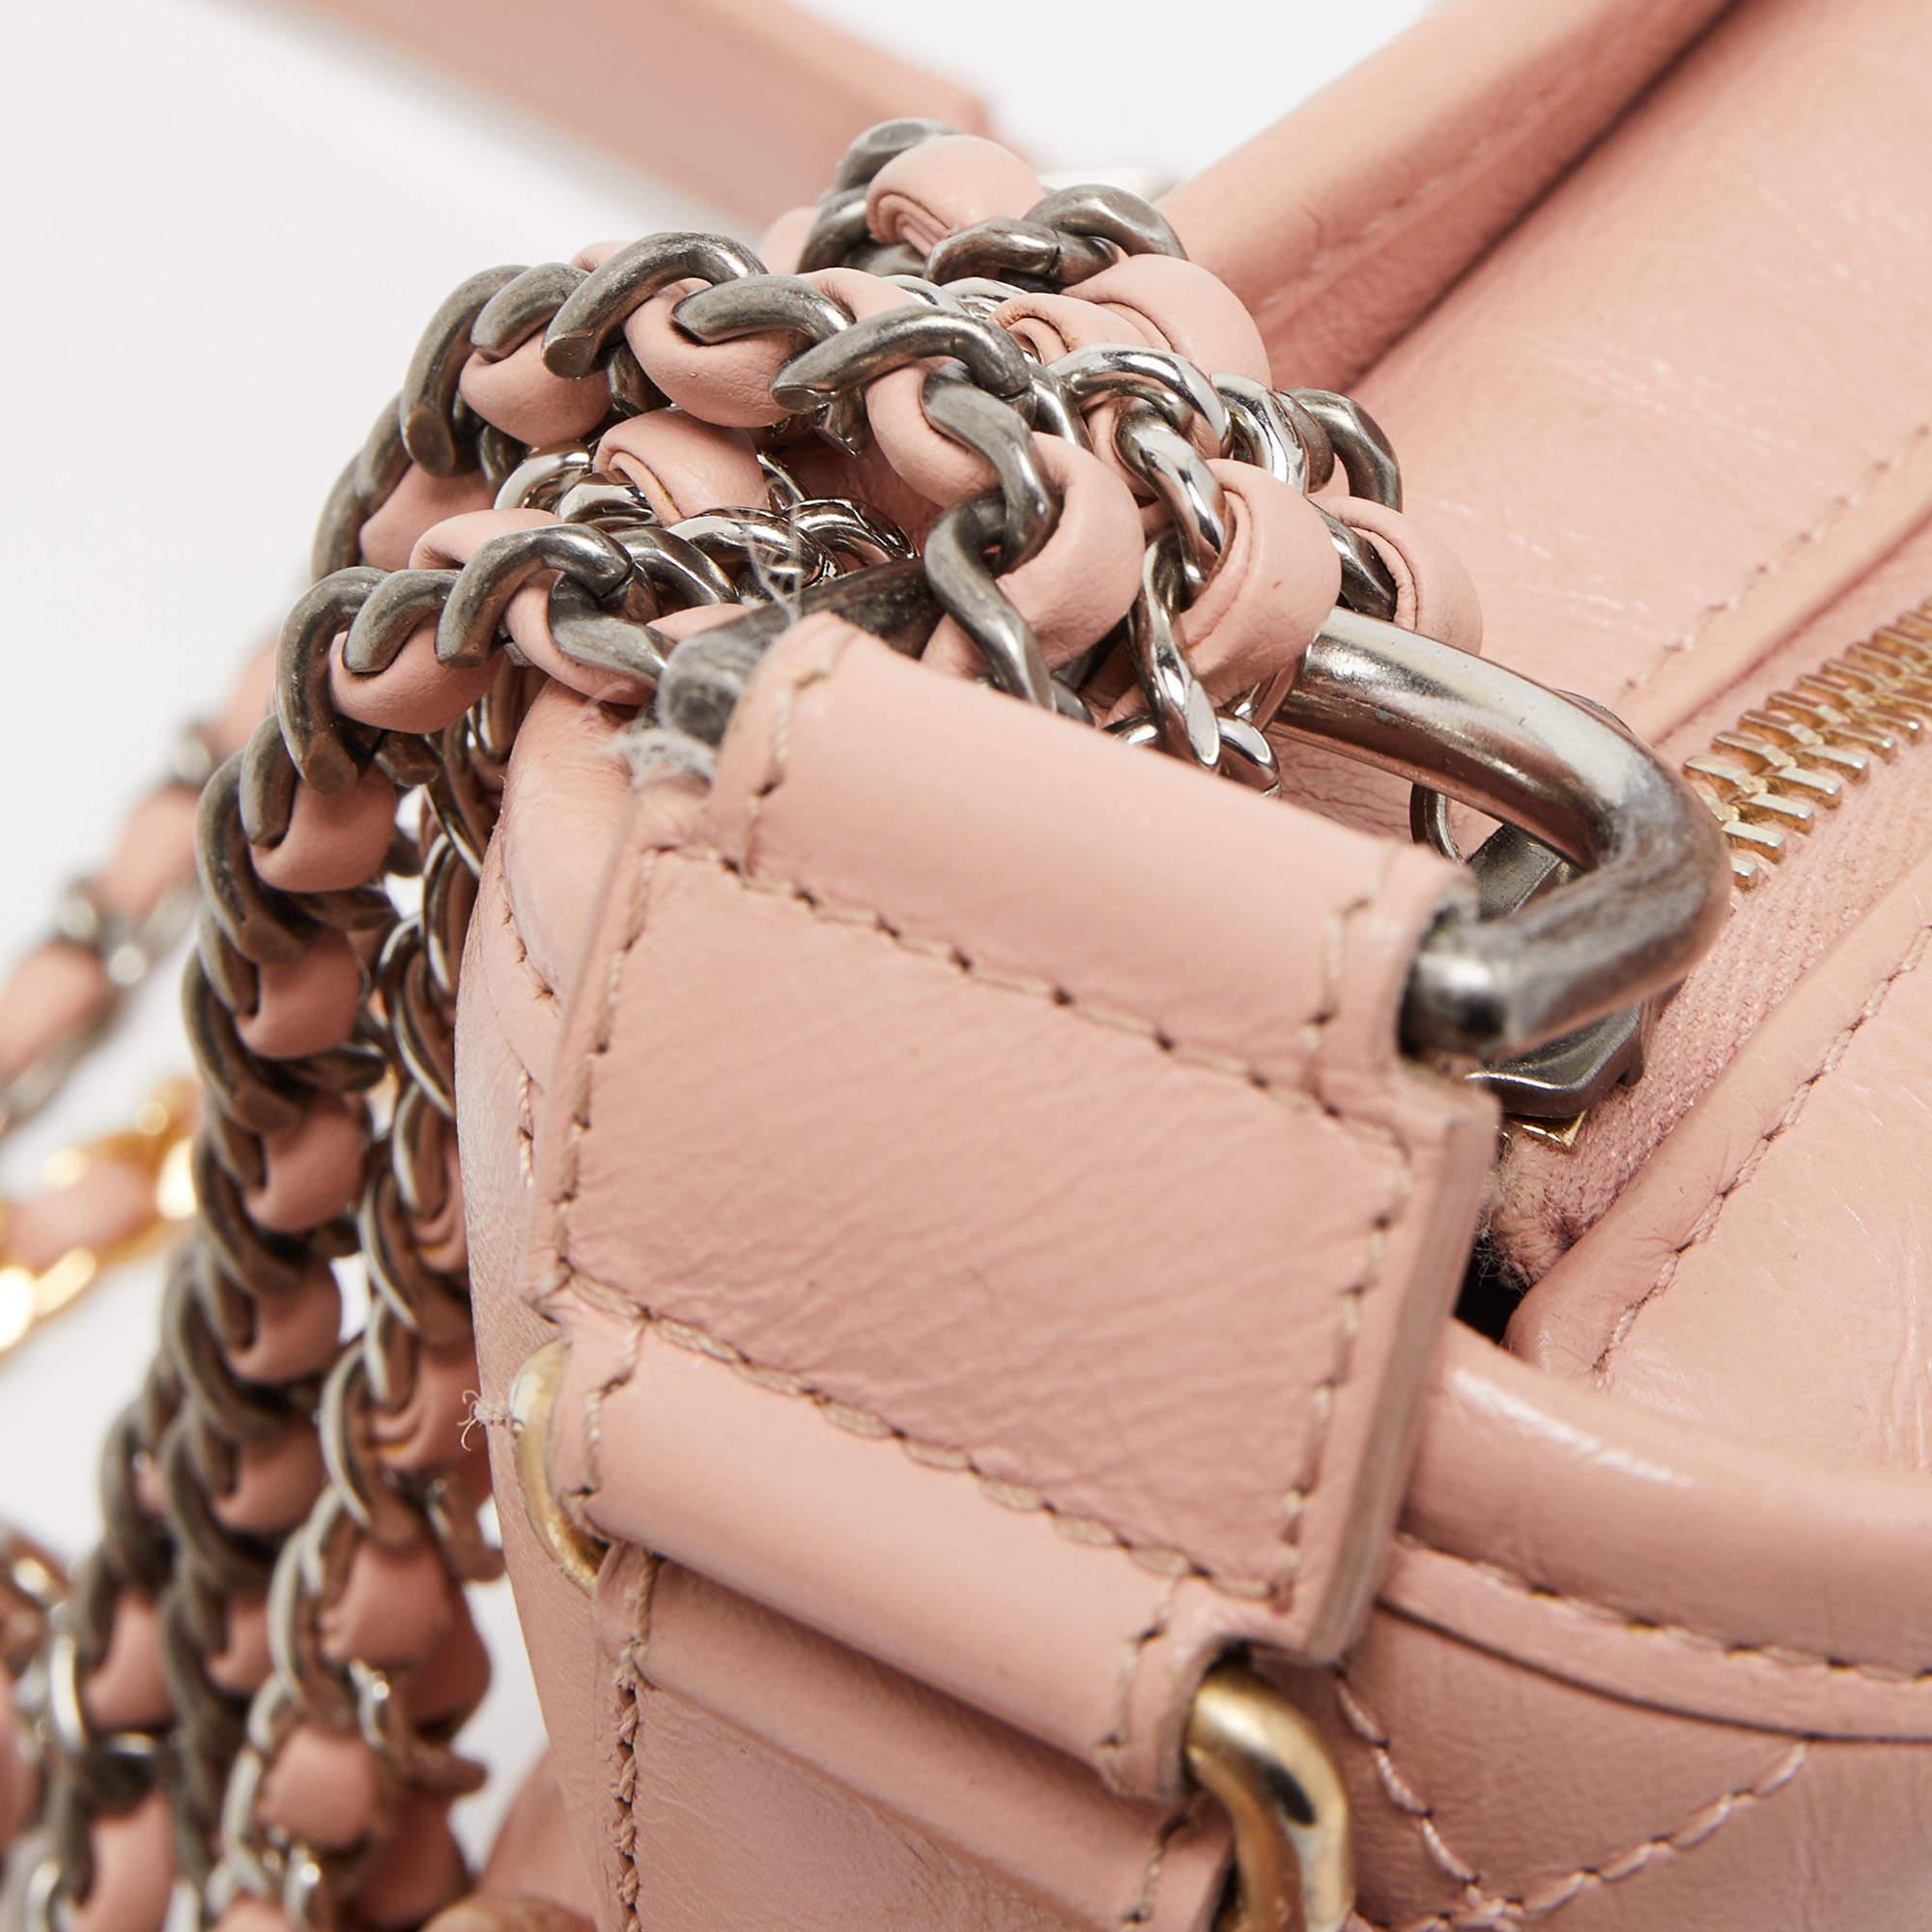 Chanel Pink Quilted Leather Small Gabrielle Hobo 8